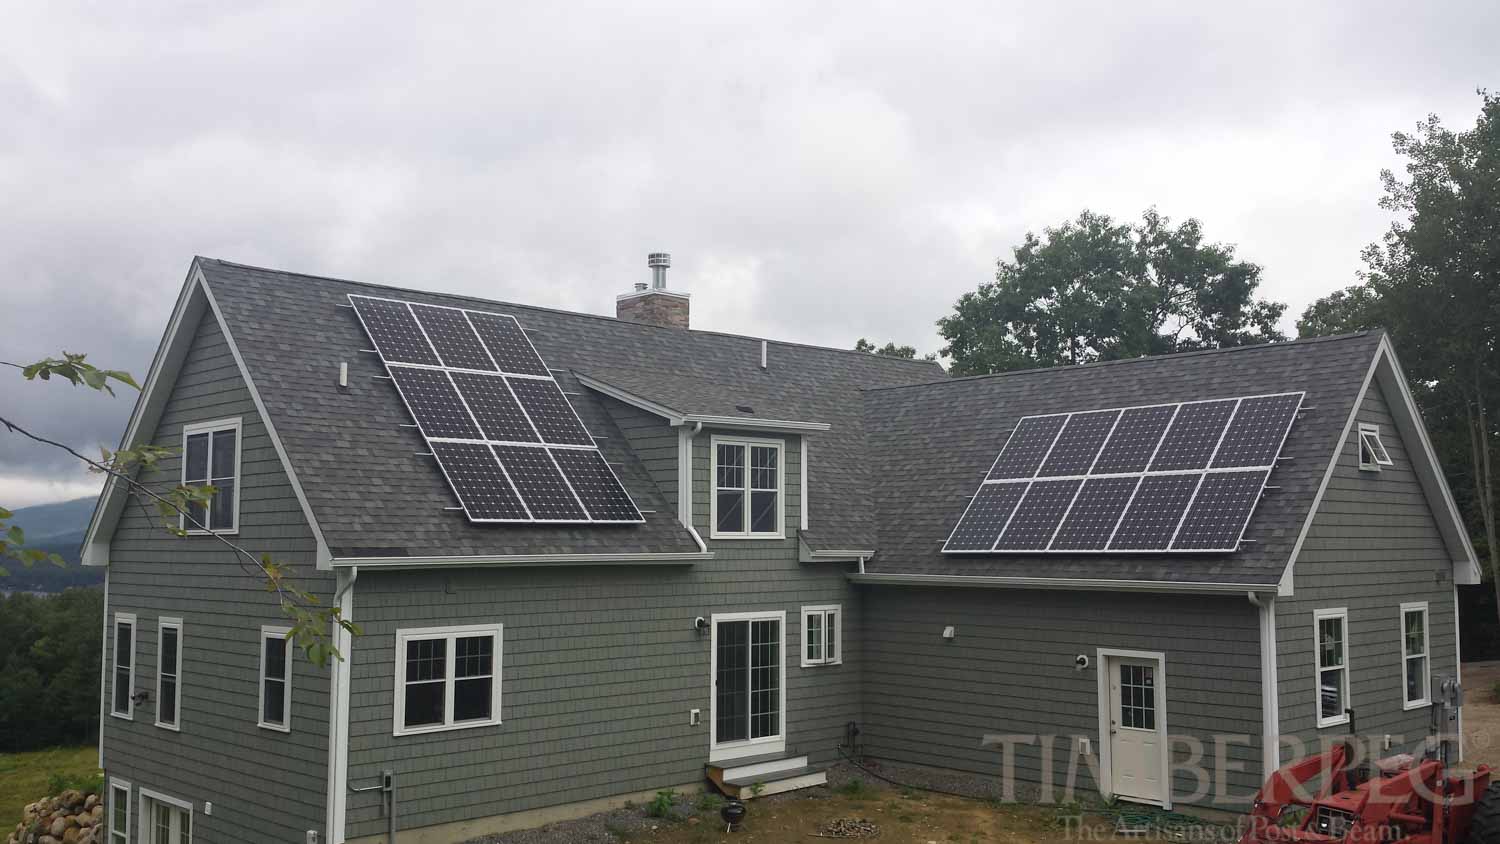 Gilmanton, NH (T00834) exterior view of back of home with solar panels on roof